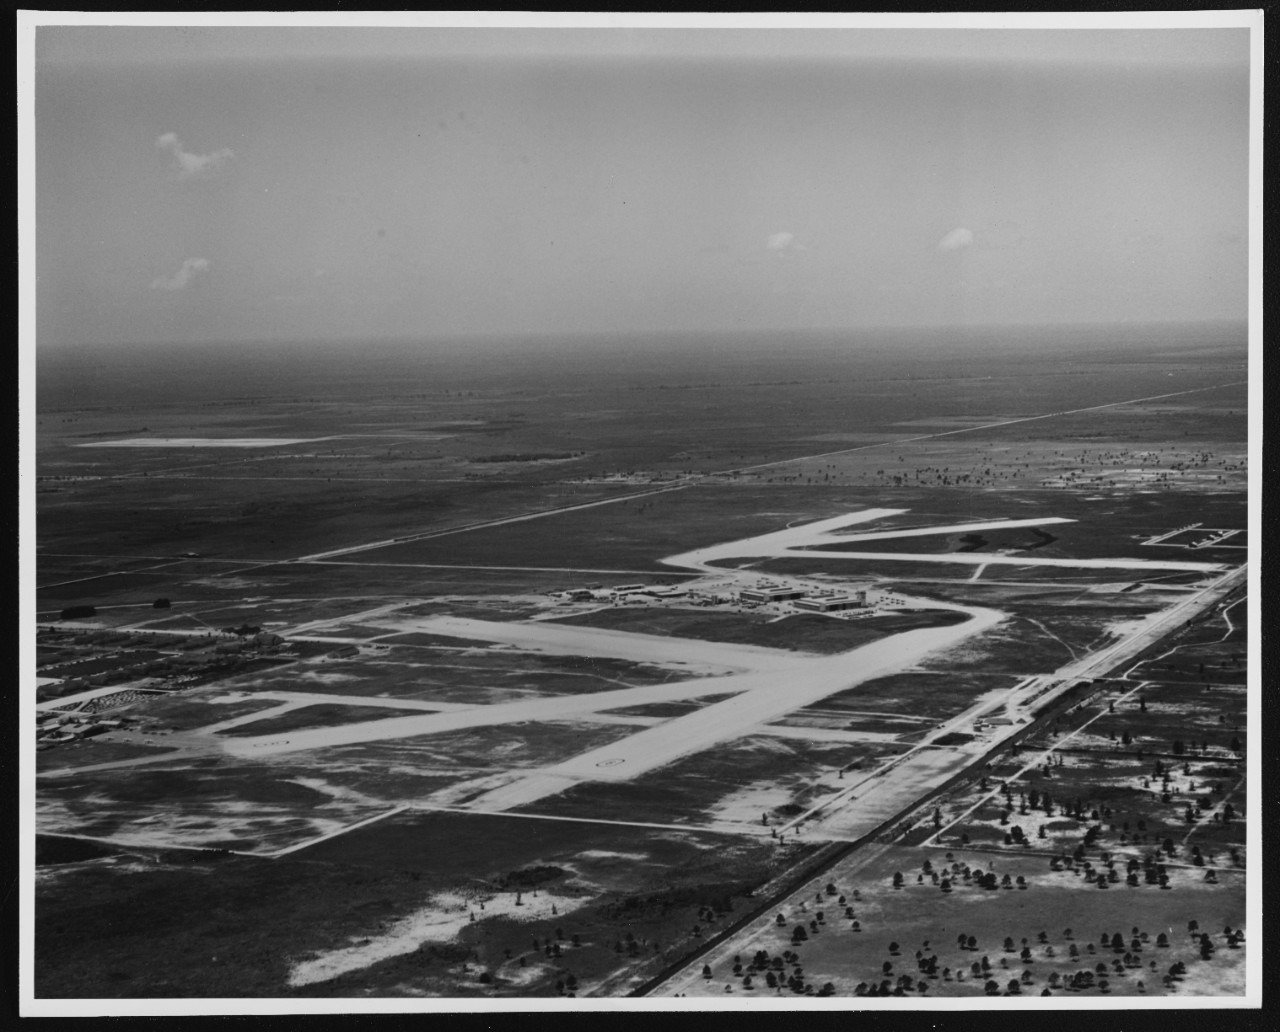 Aerial view of Administration Area, U.S. Naval Air Station, Miami, Florida.